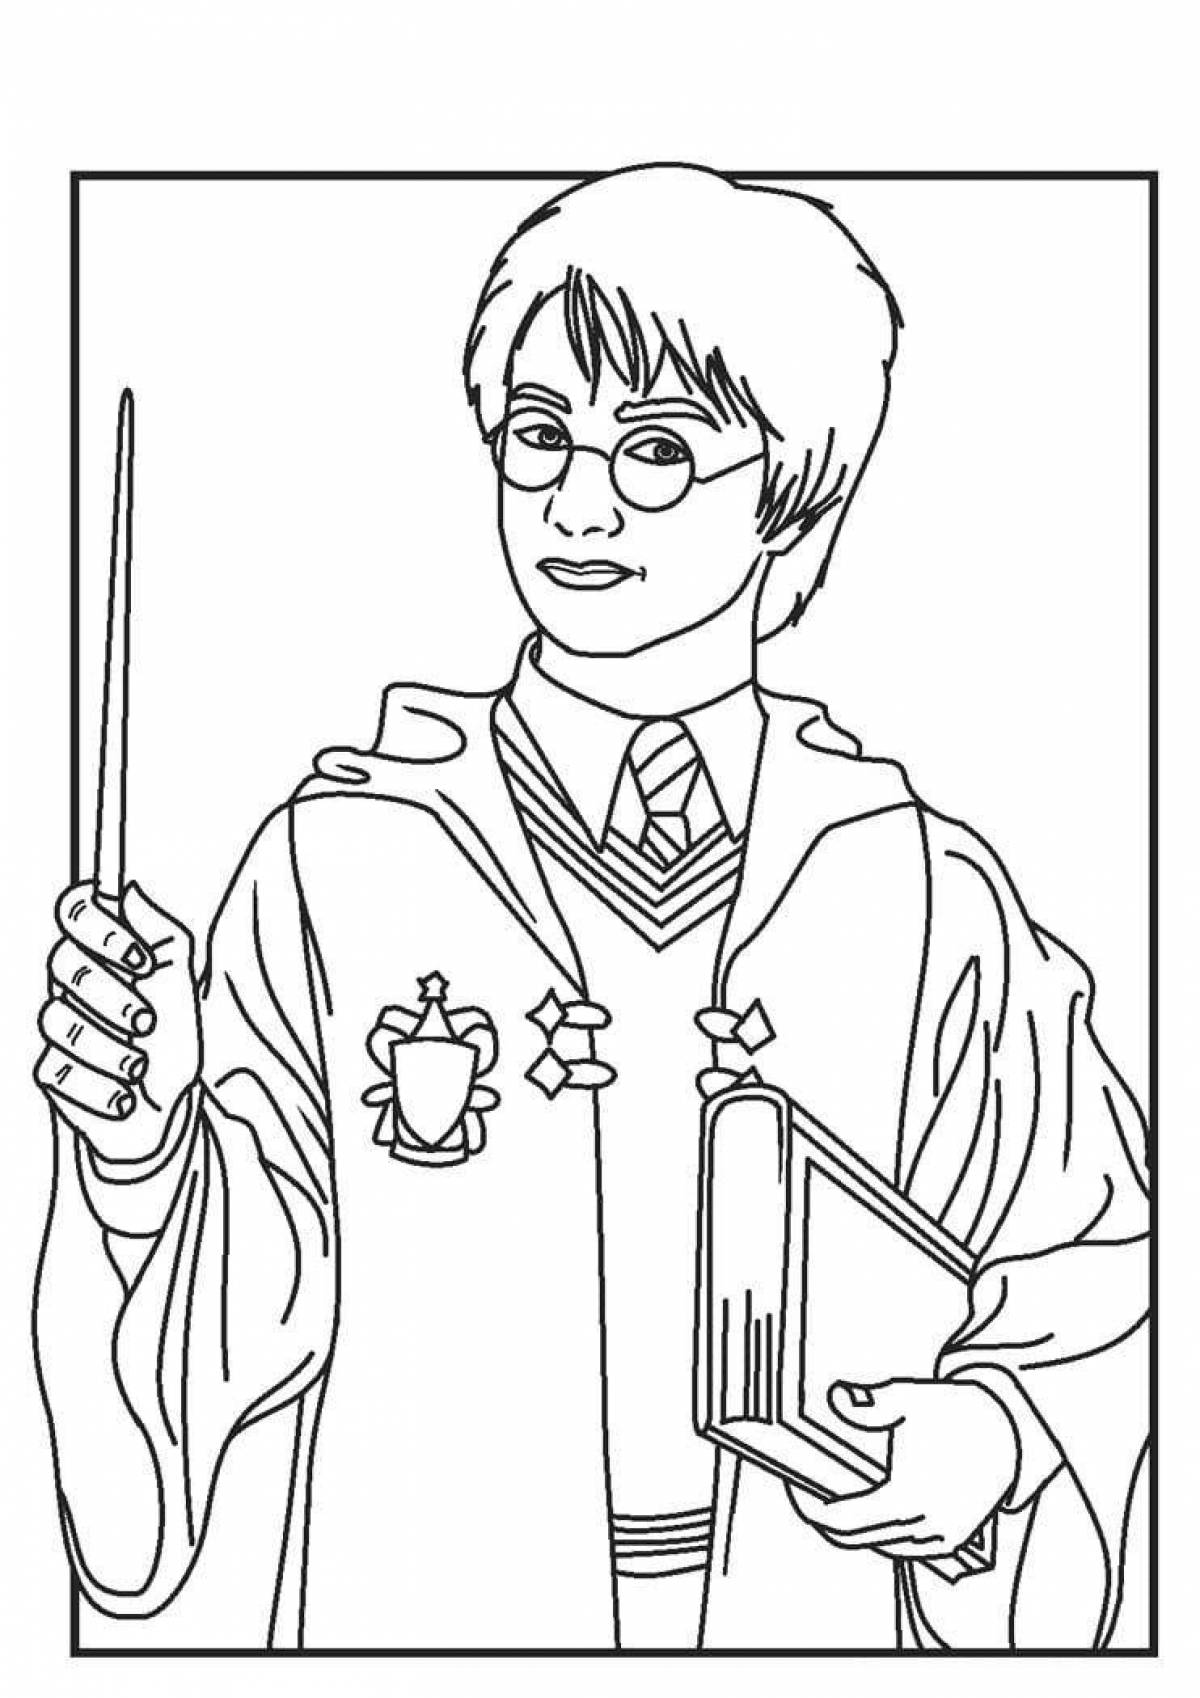 Harry Potter's amazing spiral coloring book